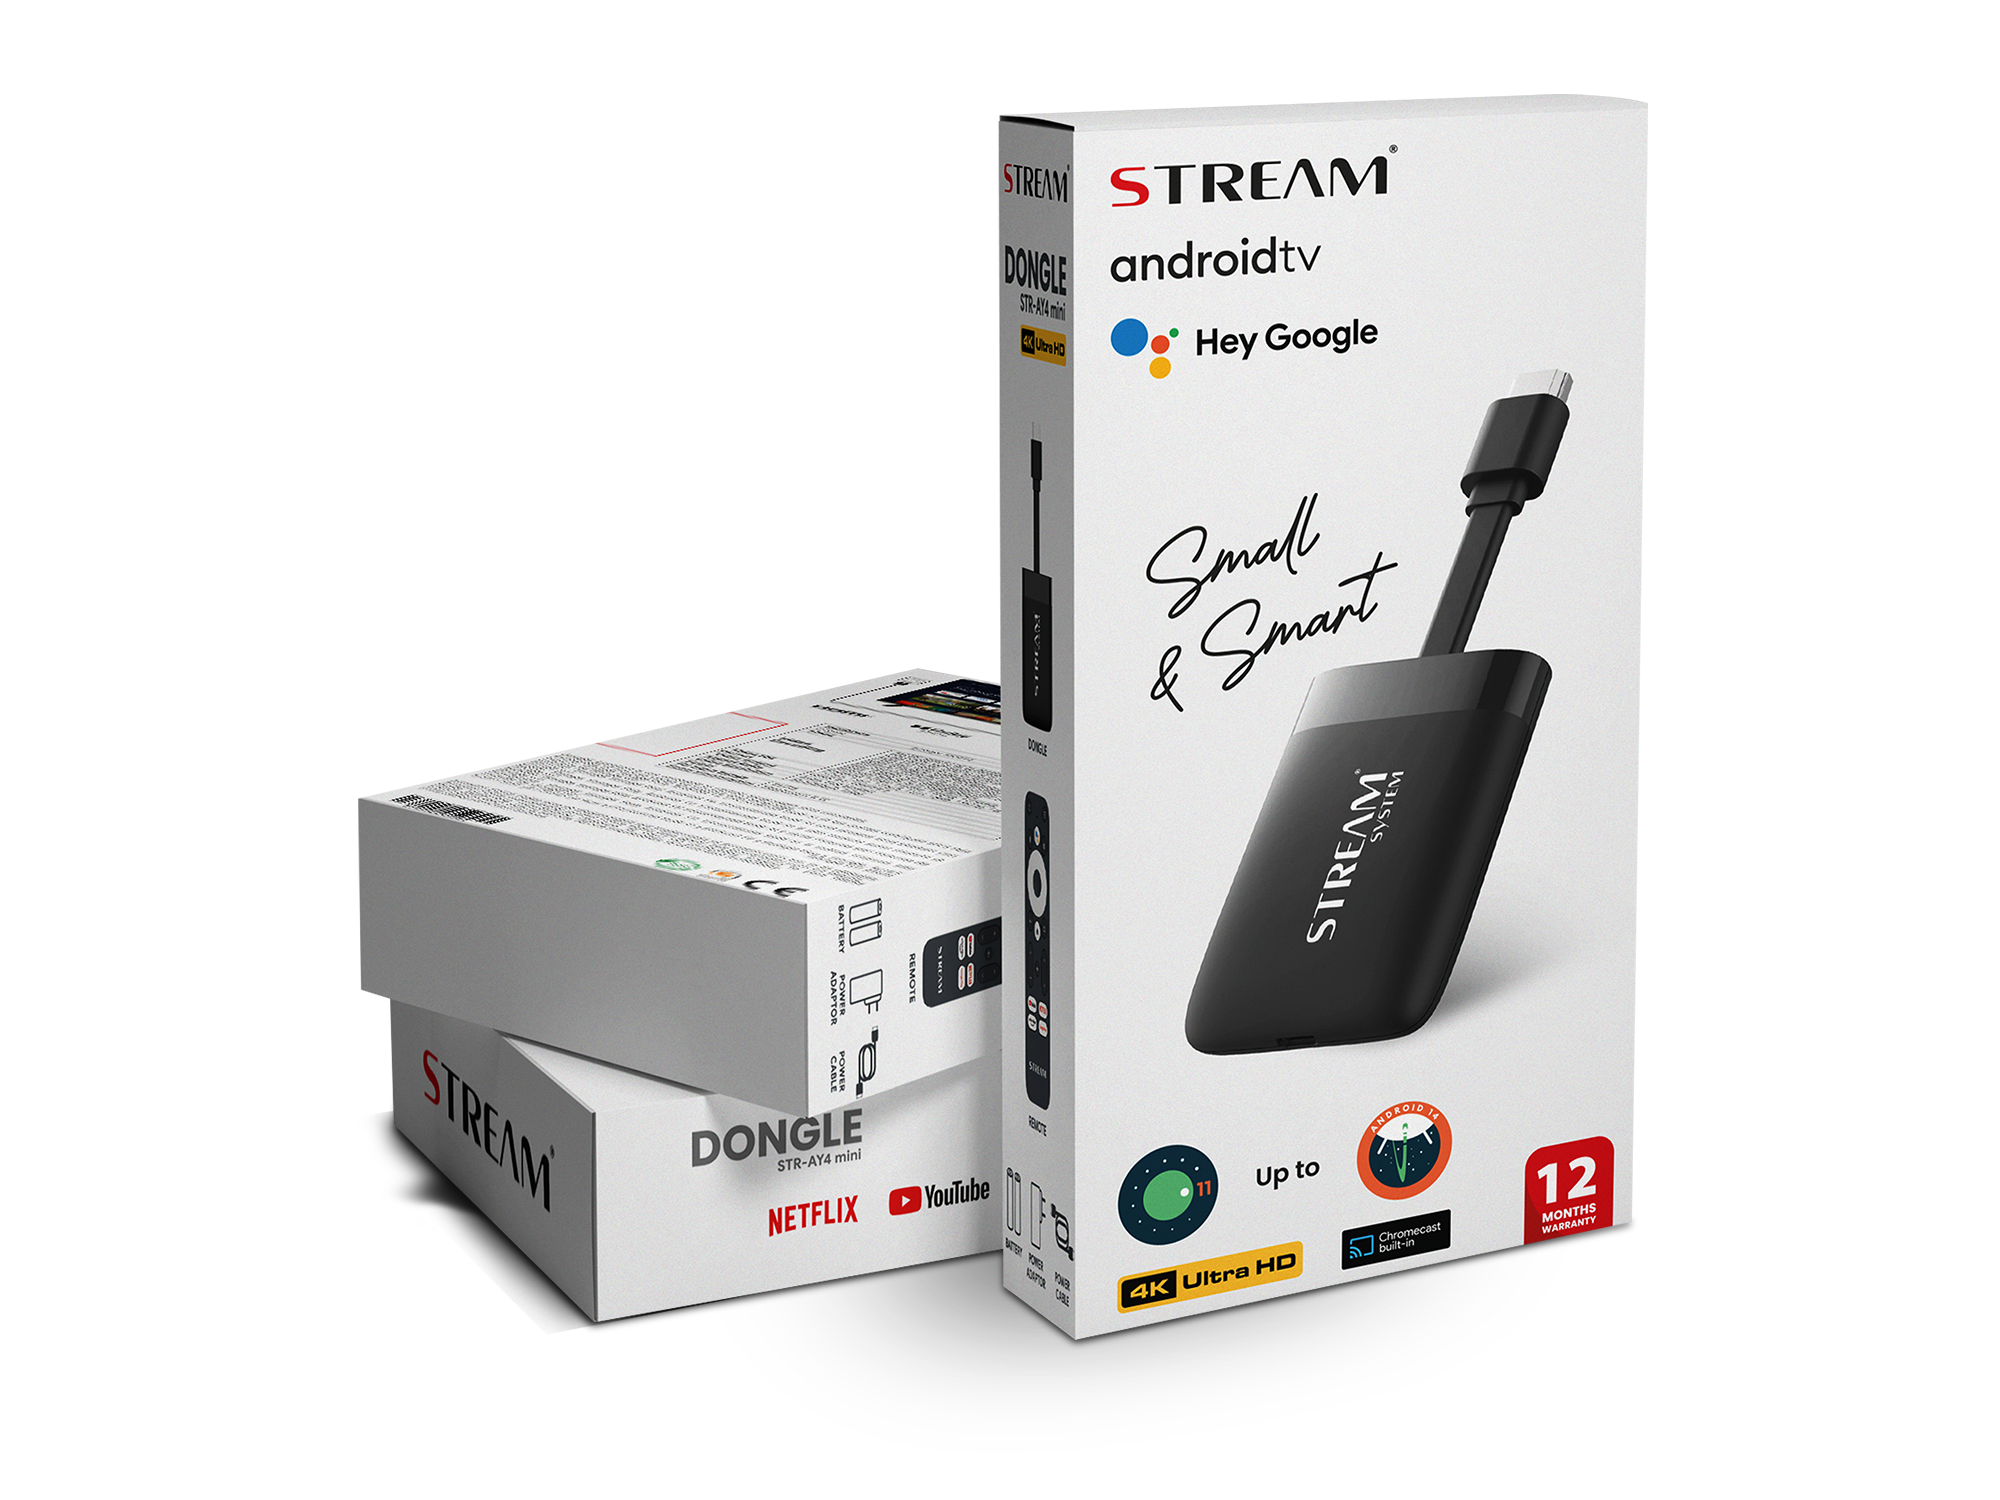 Dongle Android TV STREAM… Small and Smart!  